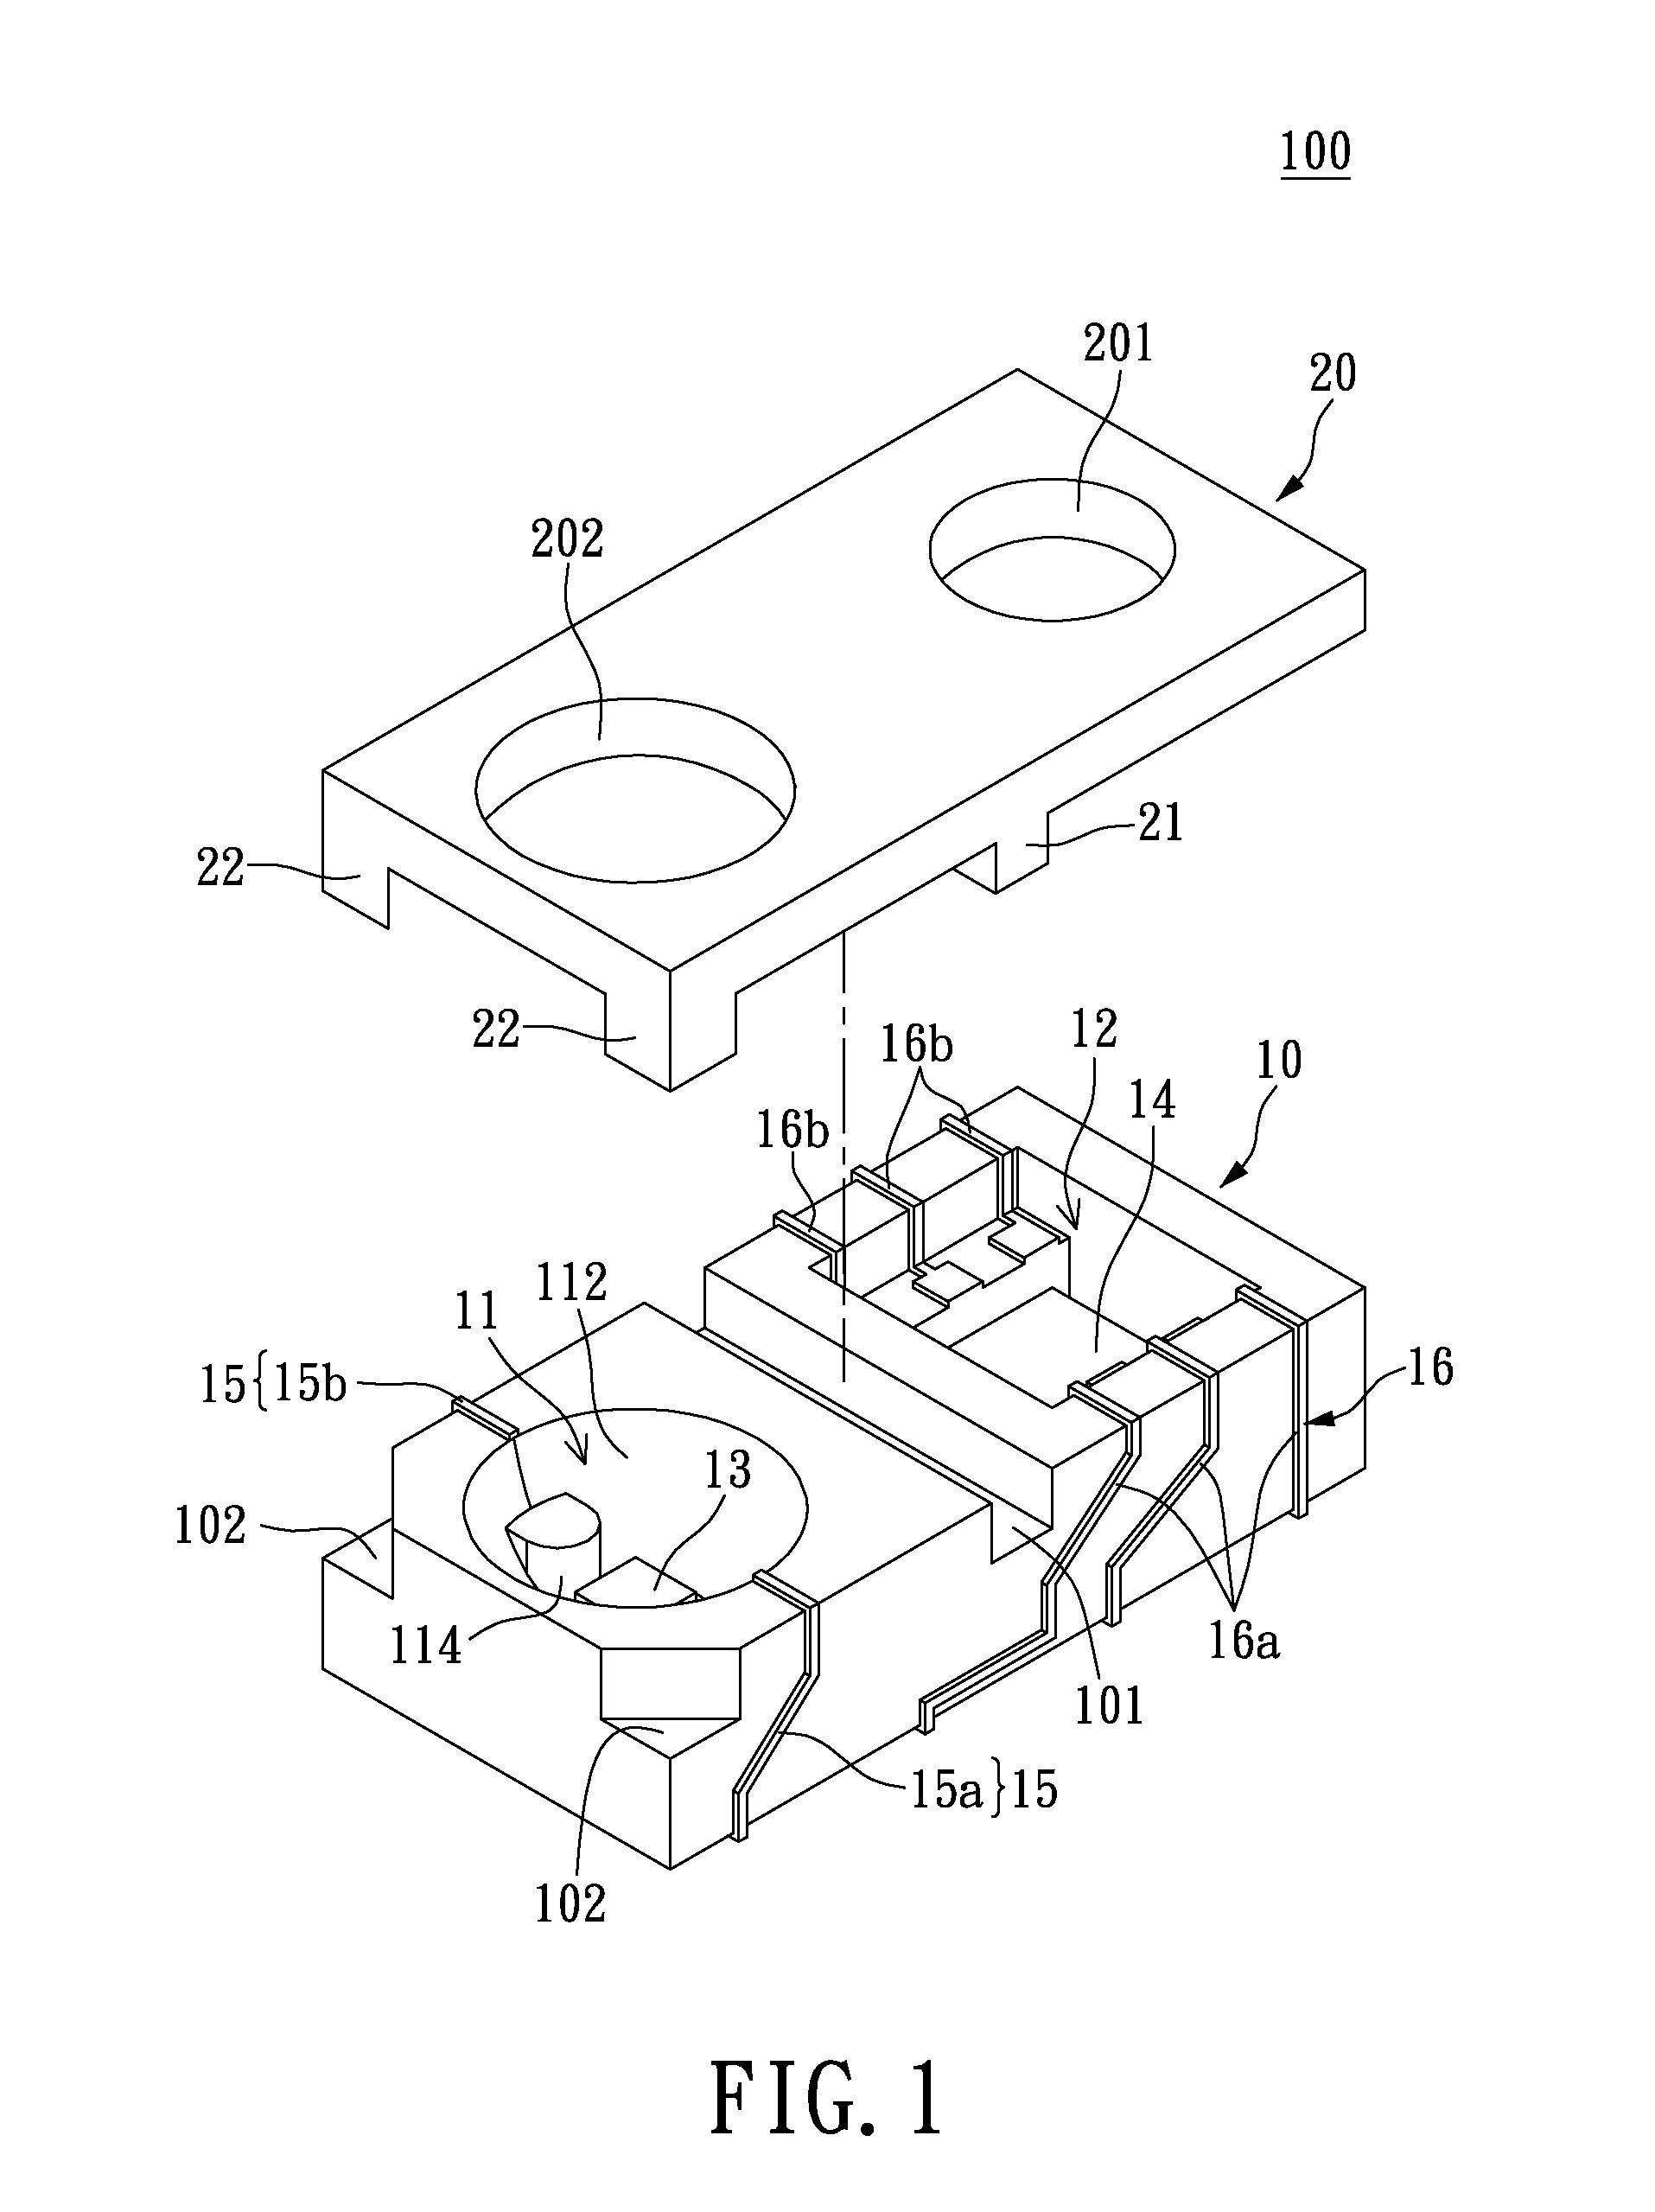 Integrated sensing package structure